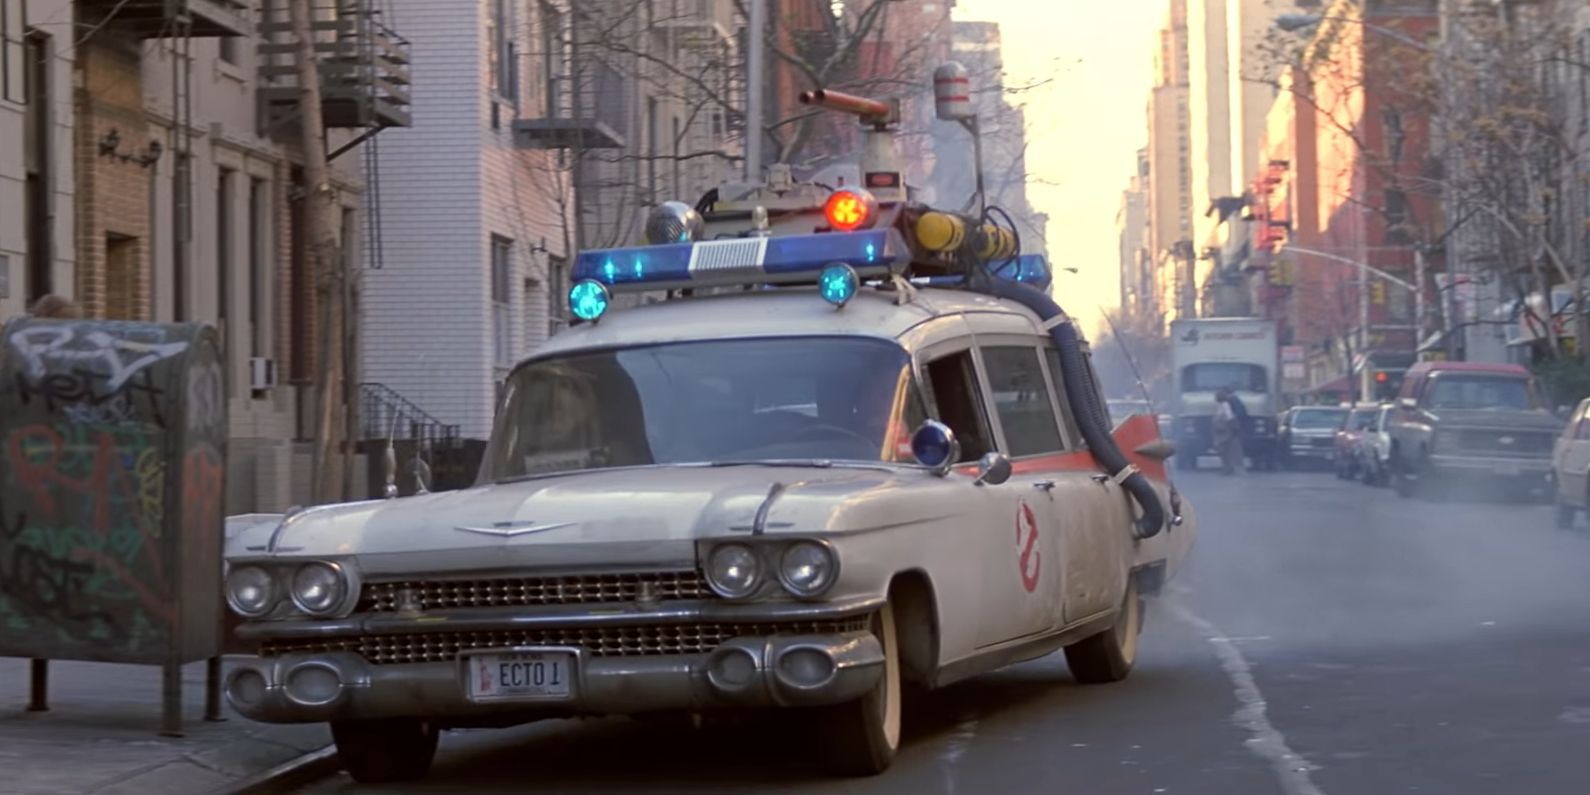 Ecto-1 smoking up out of the tailpipes in Ghostbusters II